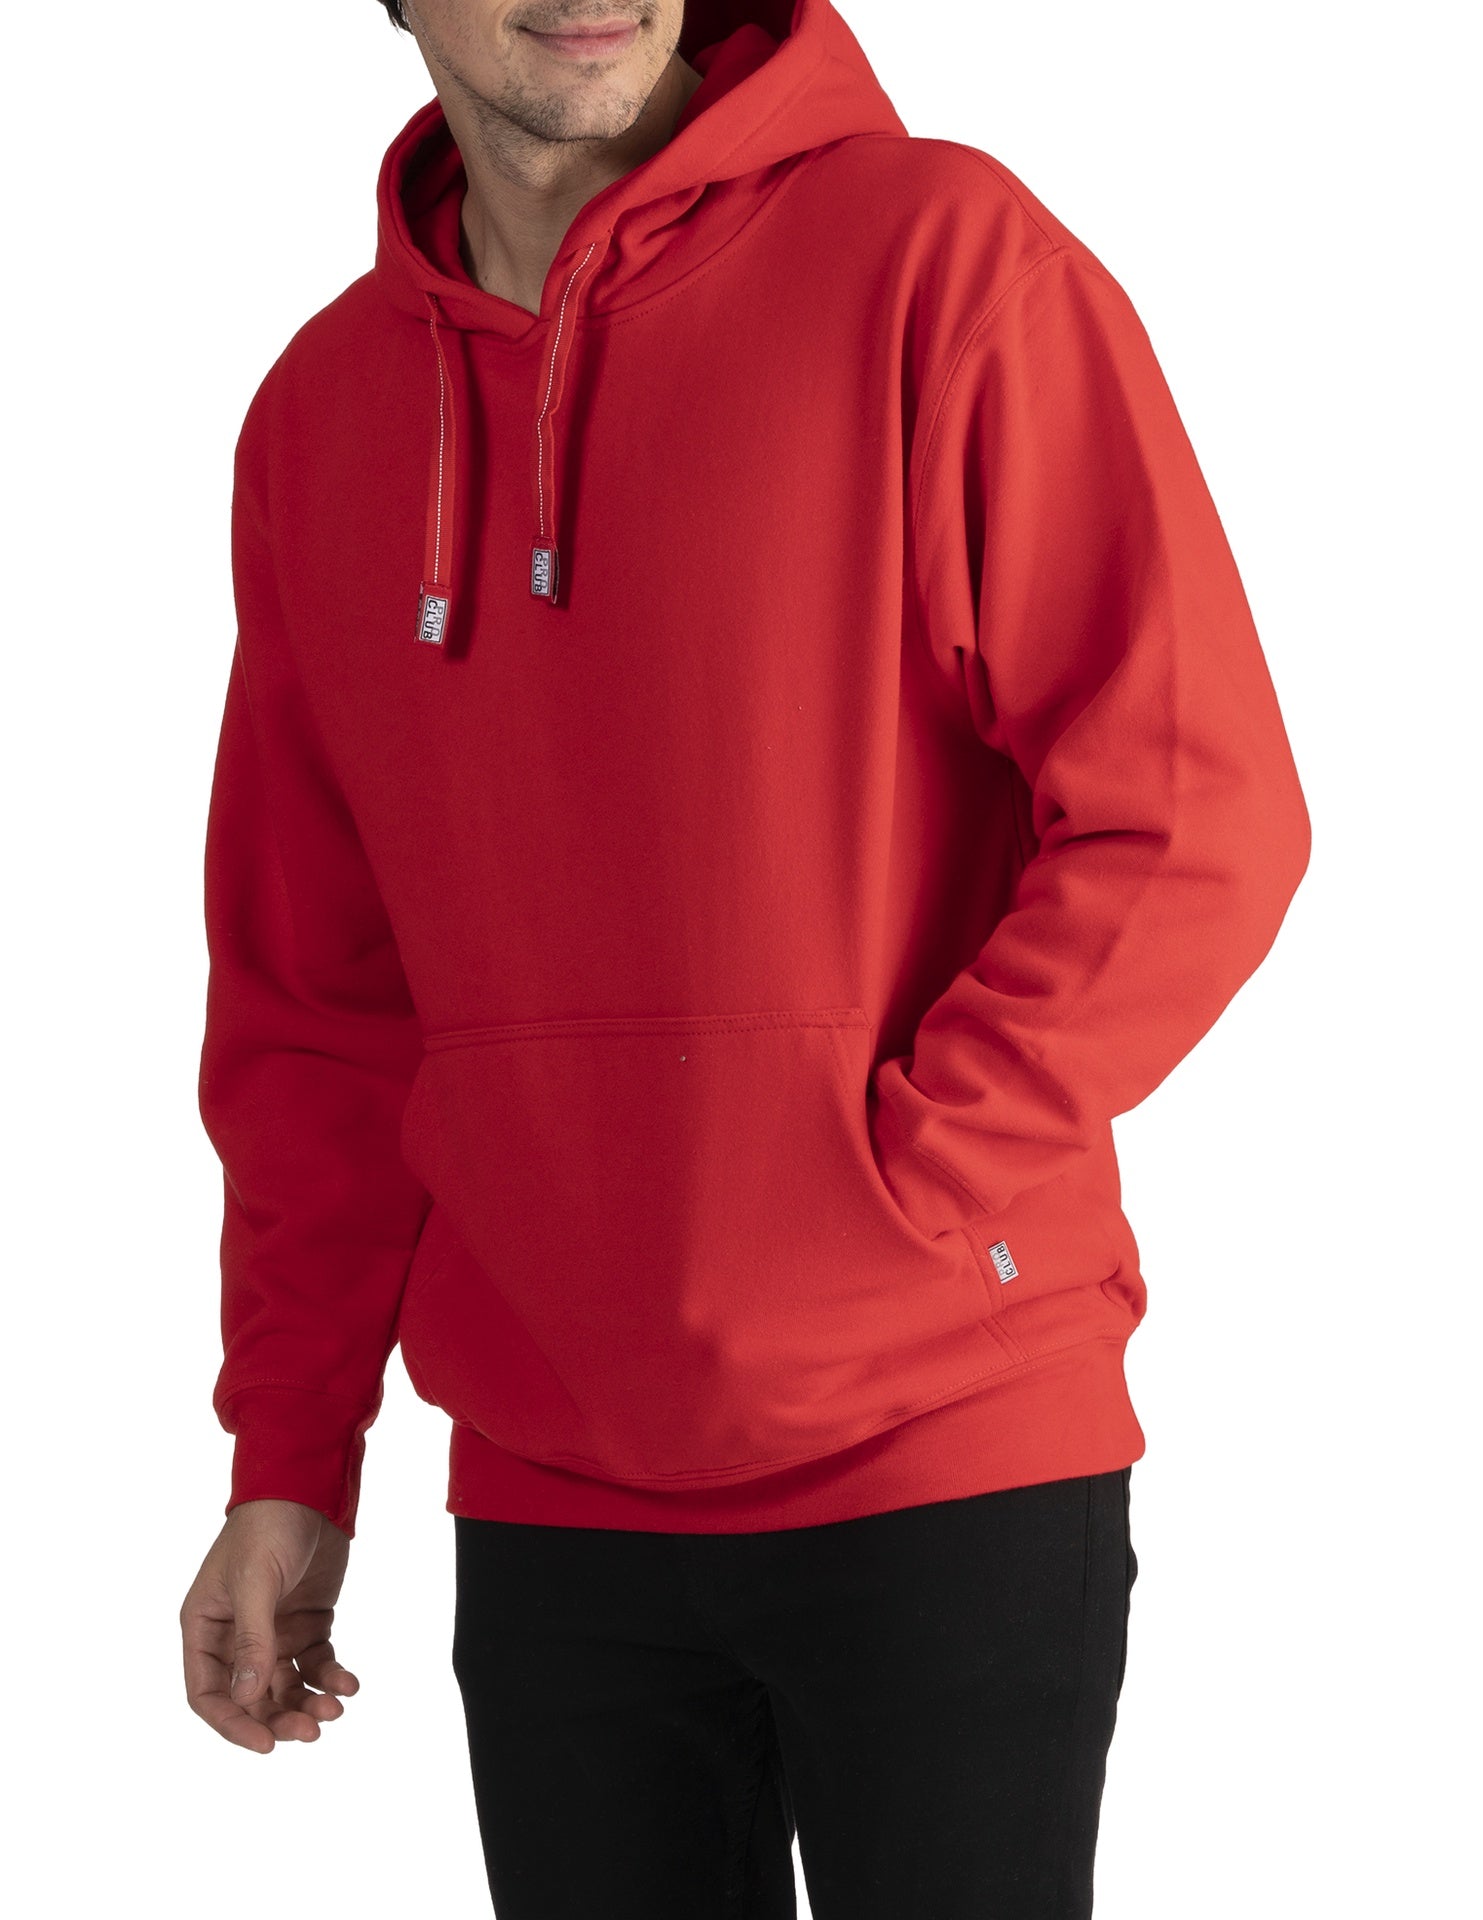 Pro Club Heavyweight Pullover Hoodie (13oz) - RED